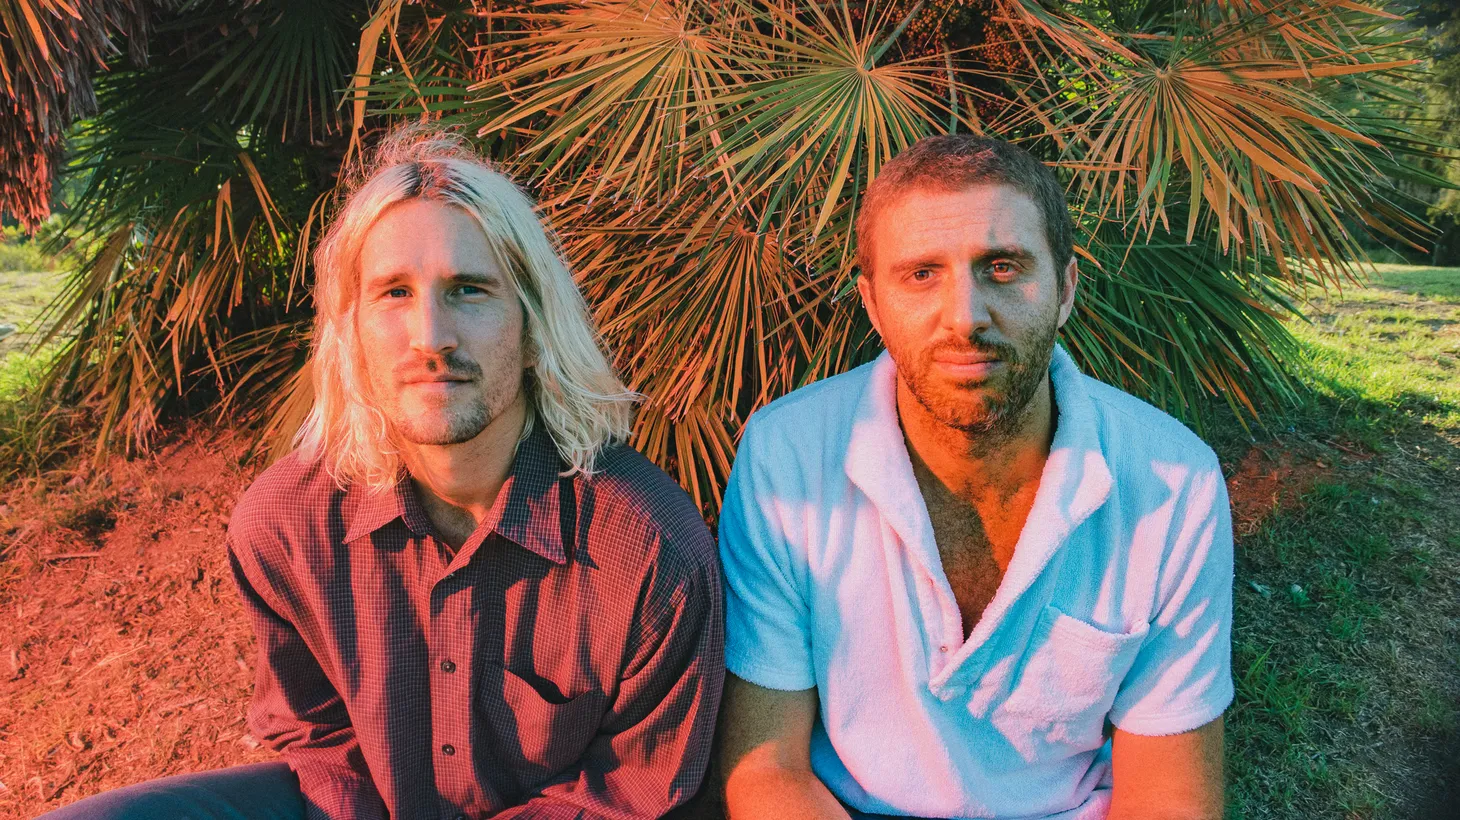 2022 was good for one of our favorites, LA duo NEIL FRANCES. They delivered their debut album, played heaps of major festivals, AND headlined sold-out shows with multi-piece bands marking them “must-see” talent.